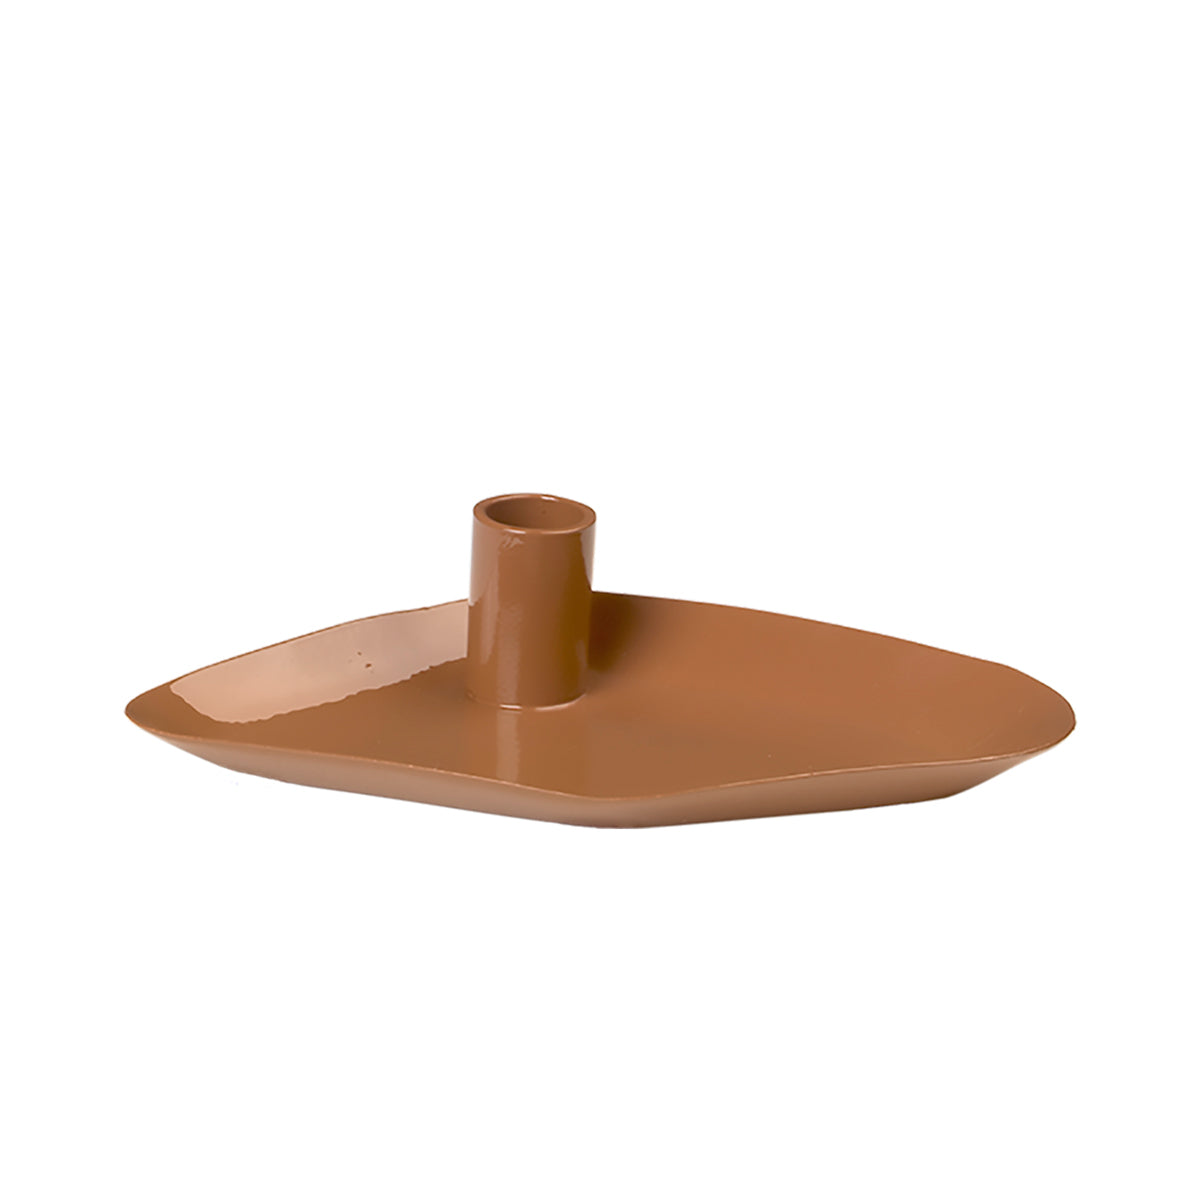 Mie Mini Candle Holder - Caramel Brown